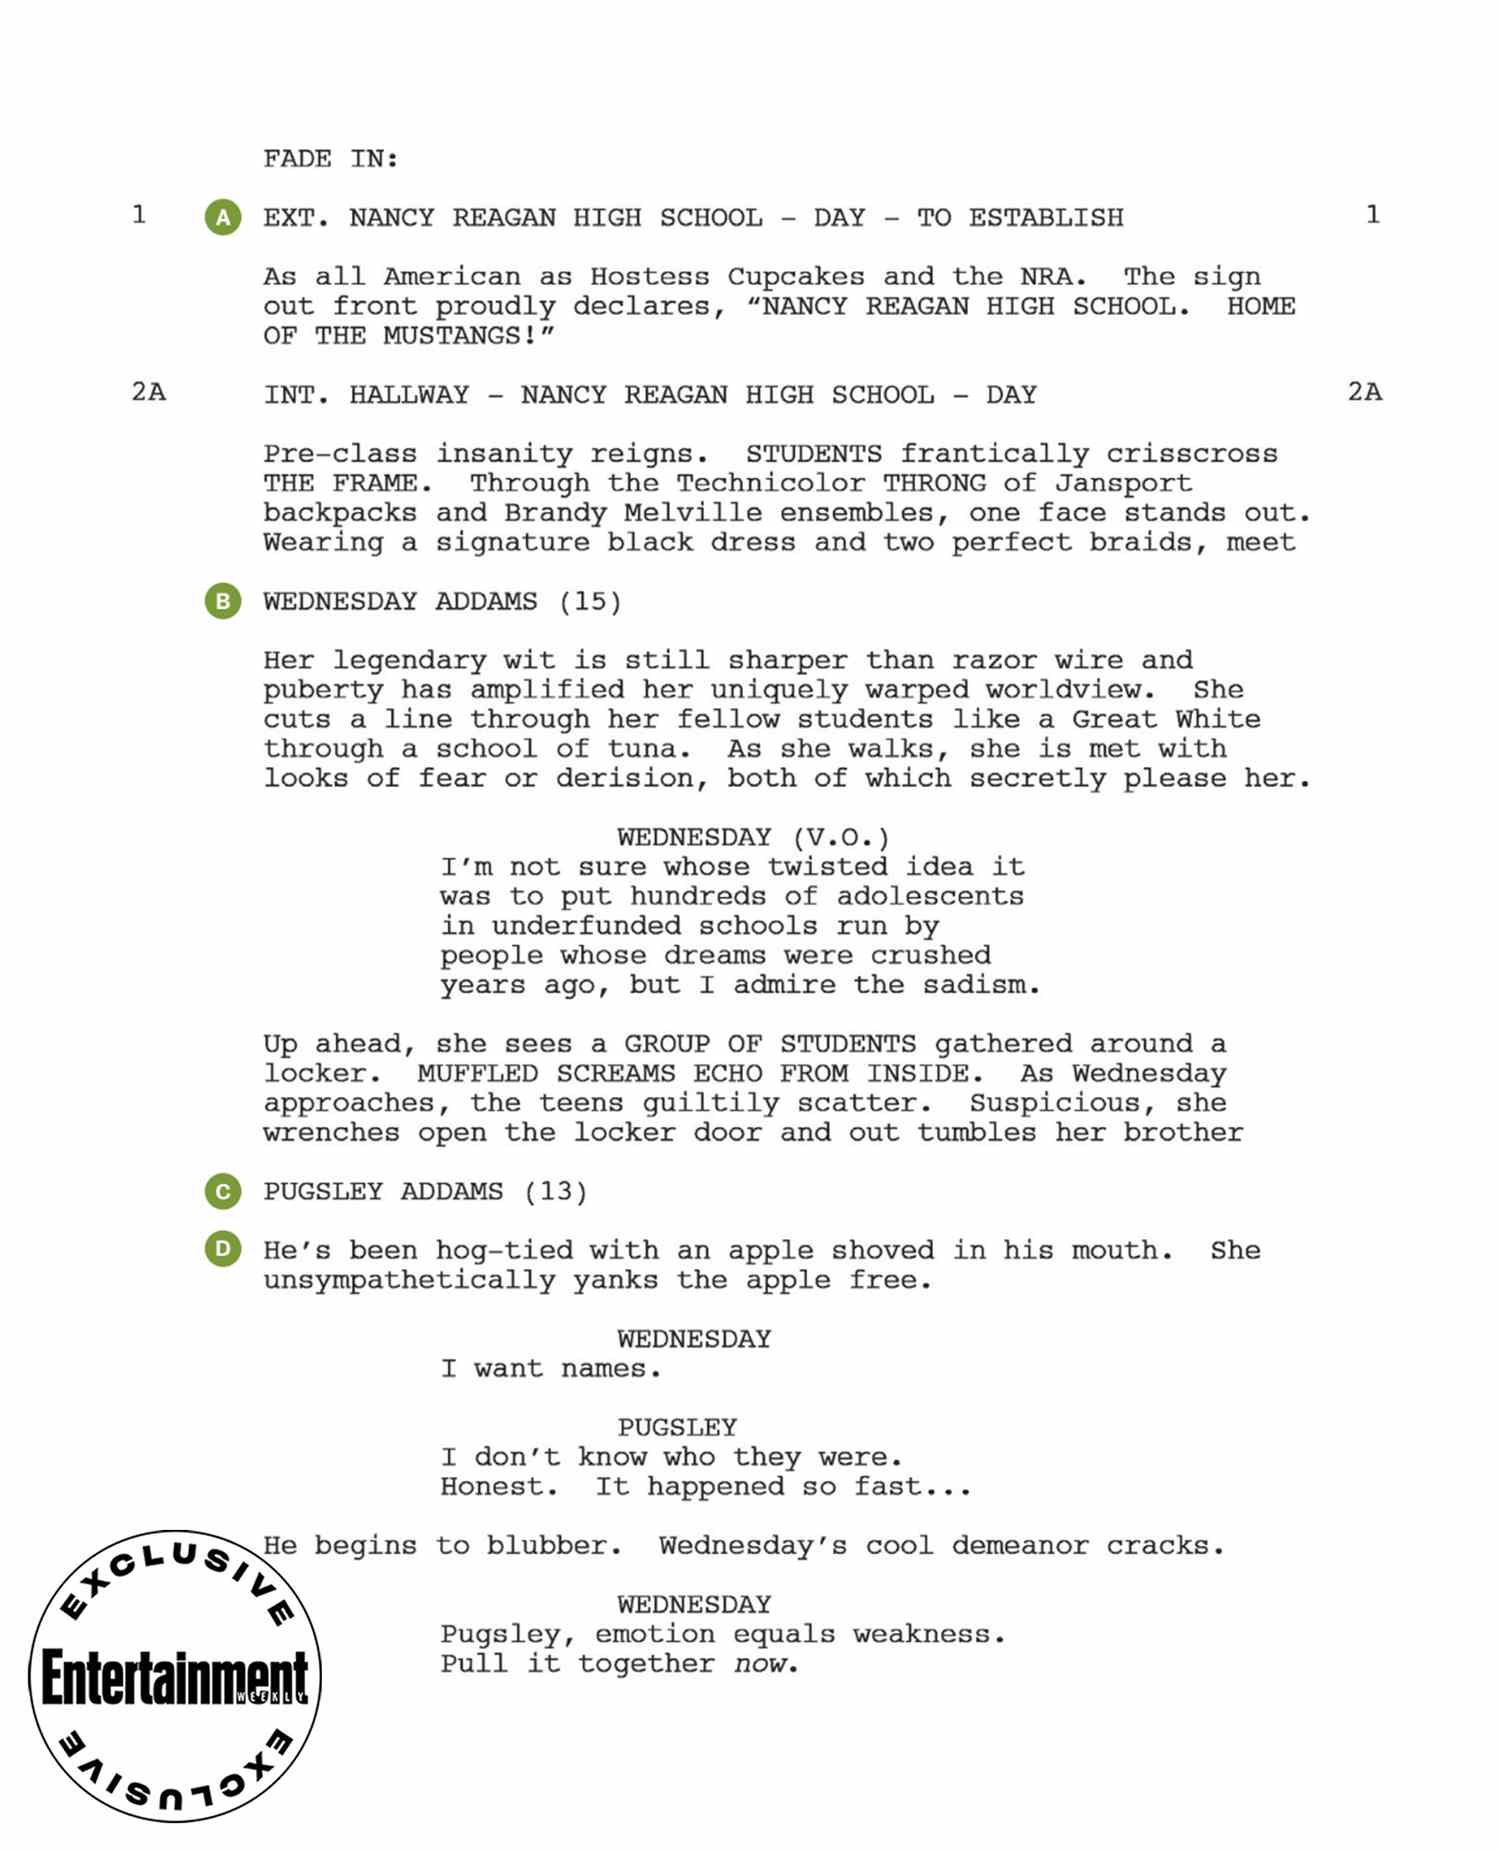 Read a script page from Wednesday, Netflix's Wednesday Addams series | EW.com